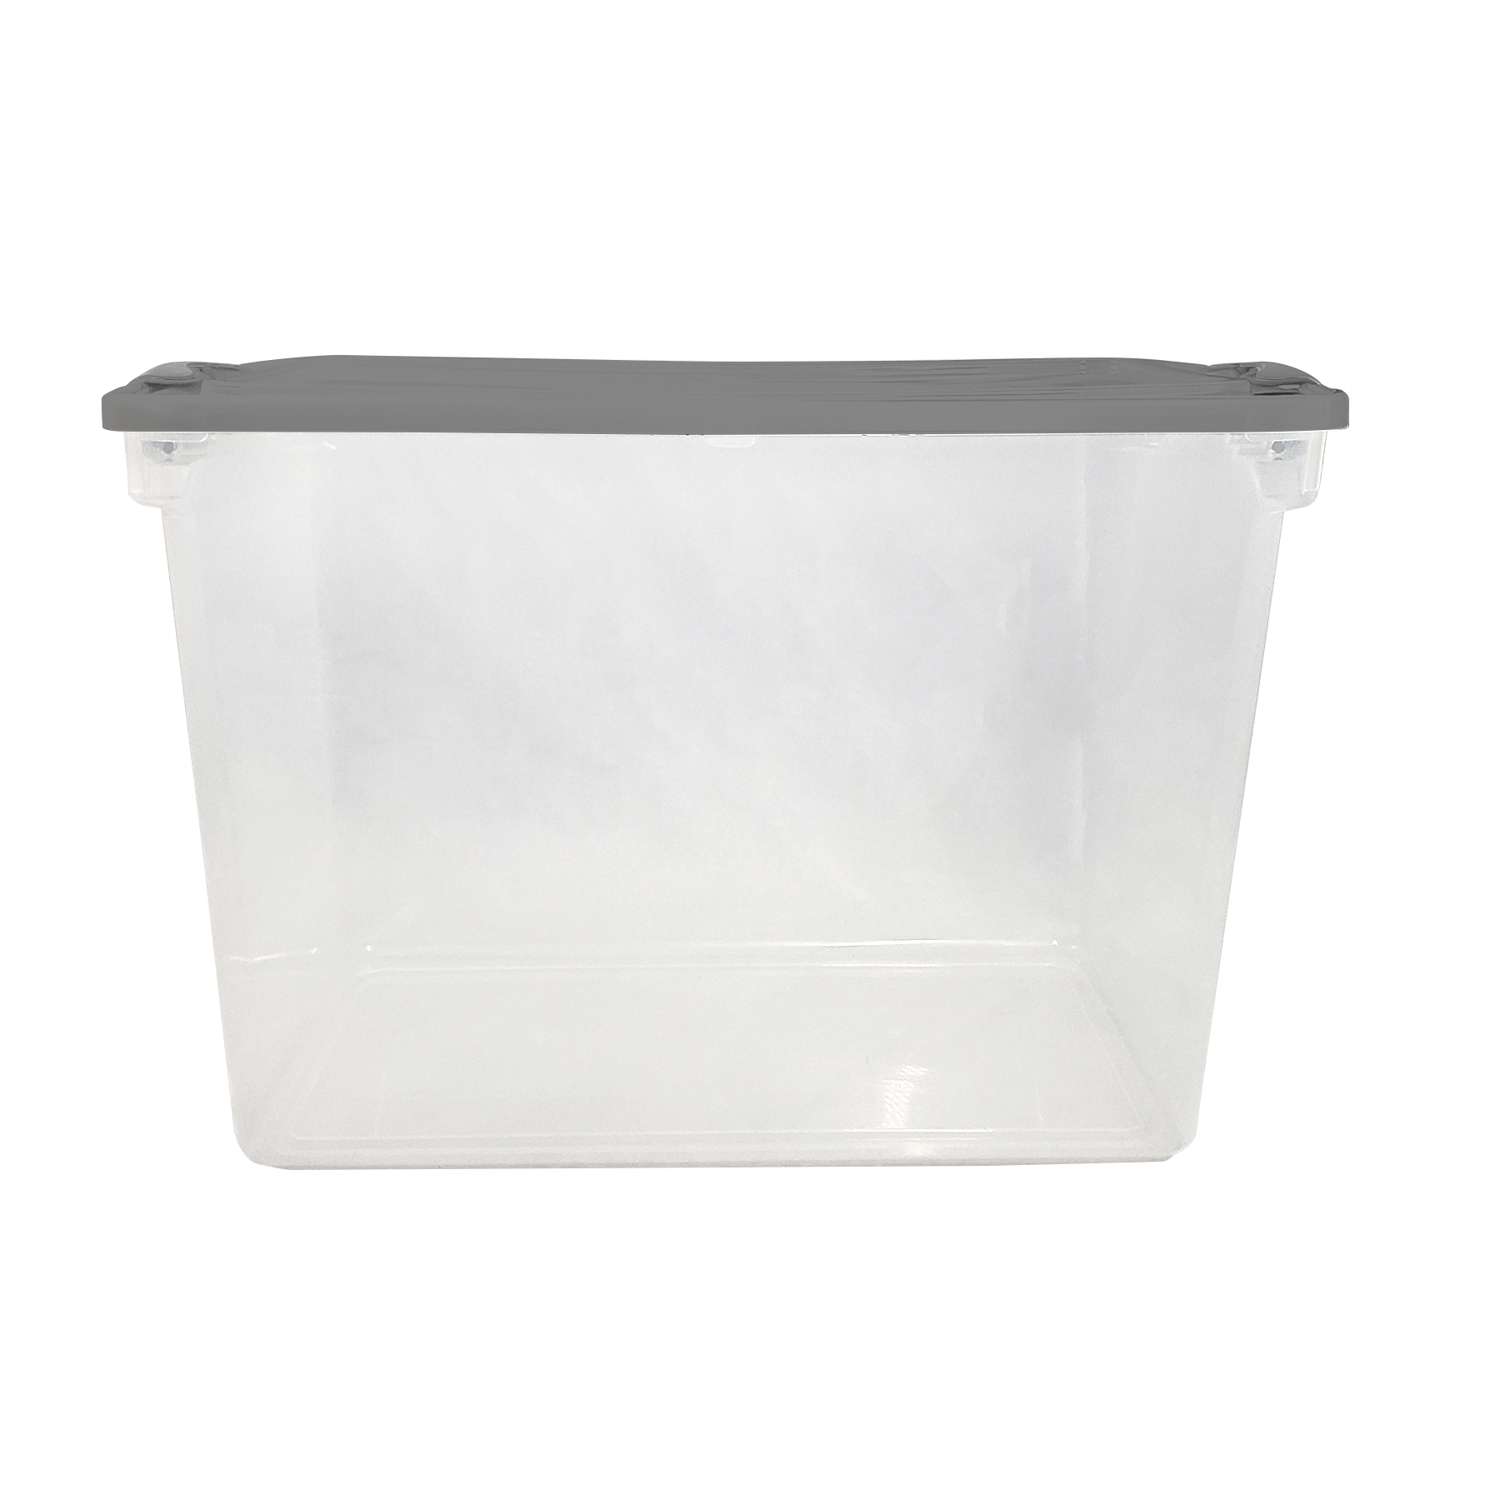 HOMZ 112 Quart Latching Plastic Storage Container, Extra Large, Clear (2  Pack), 1 Piece - Gerbes Super Markets